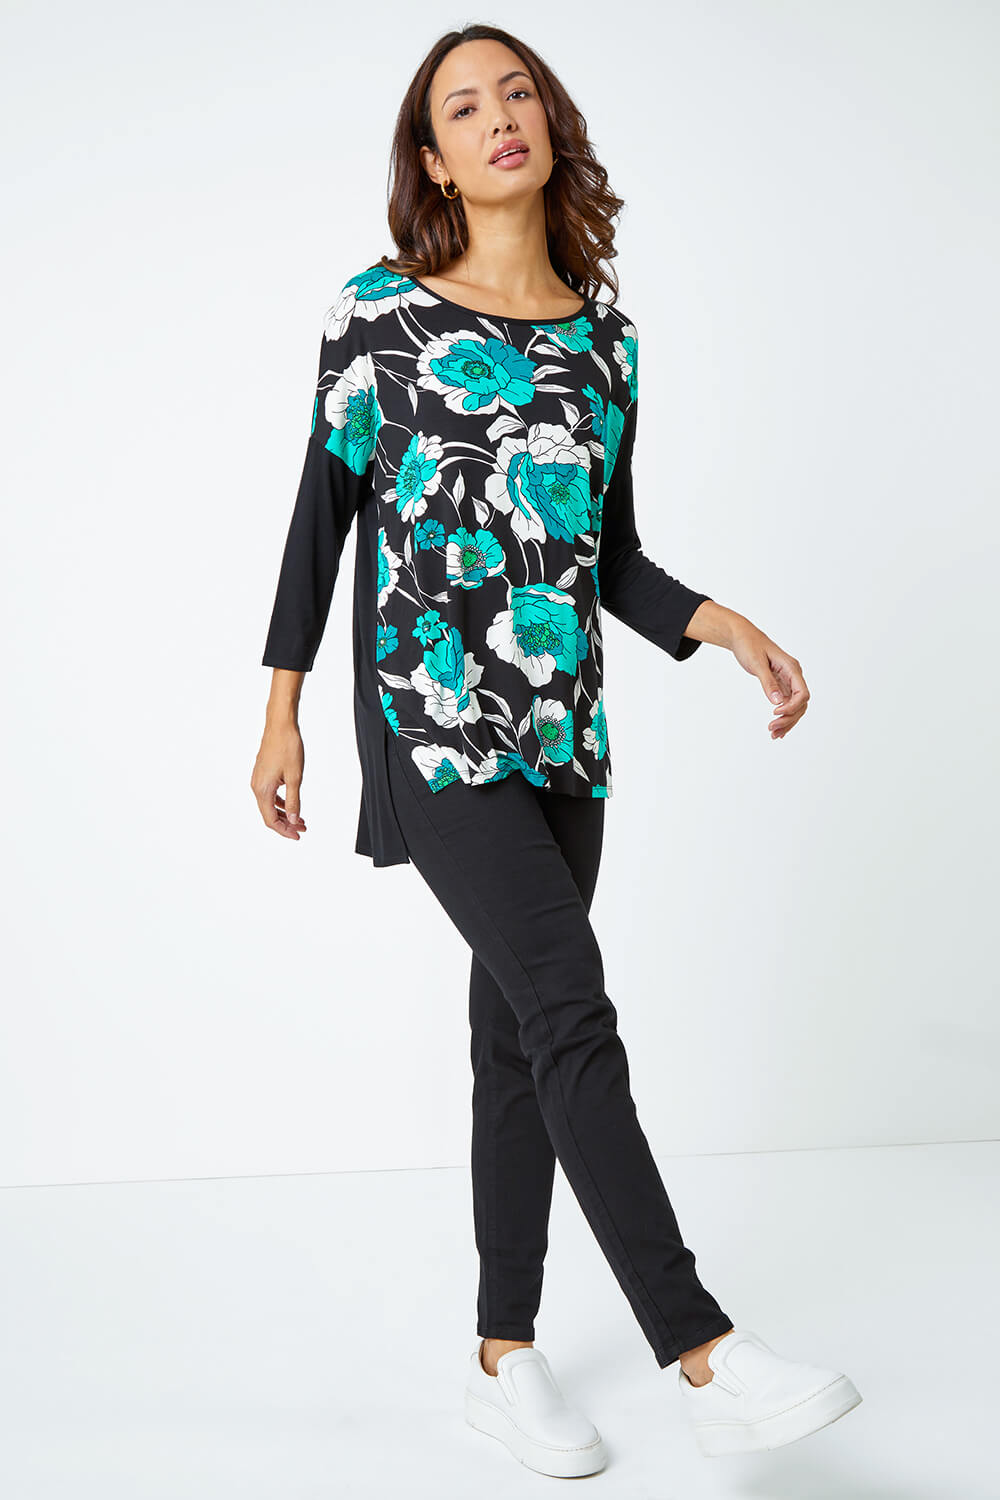 Green Contrast Sleeve Floral Print Top, Image 2 of 4